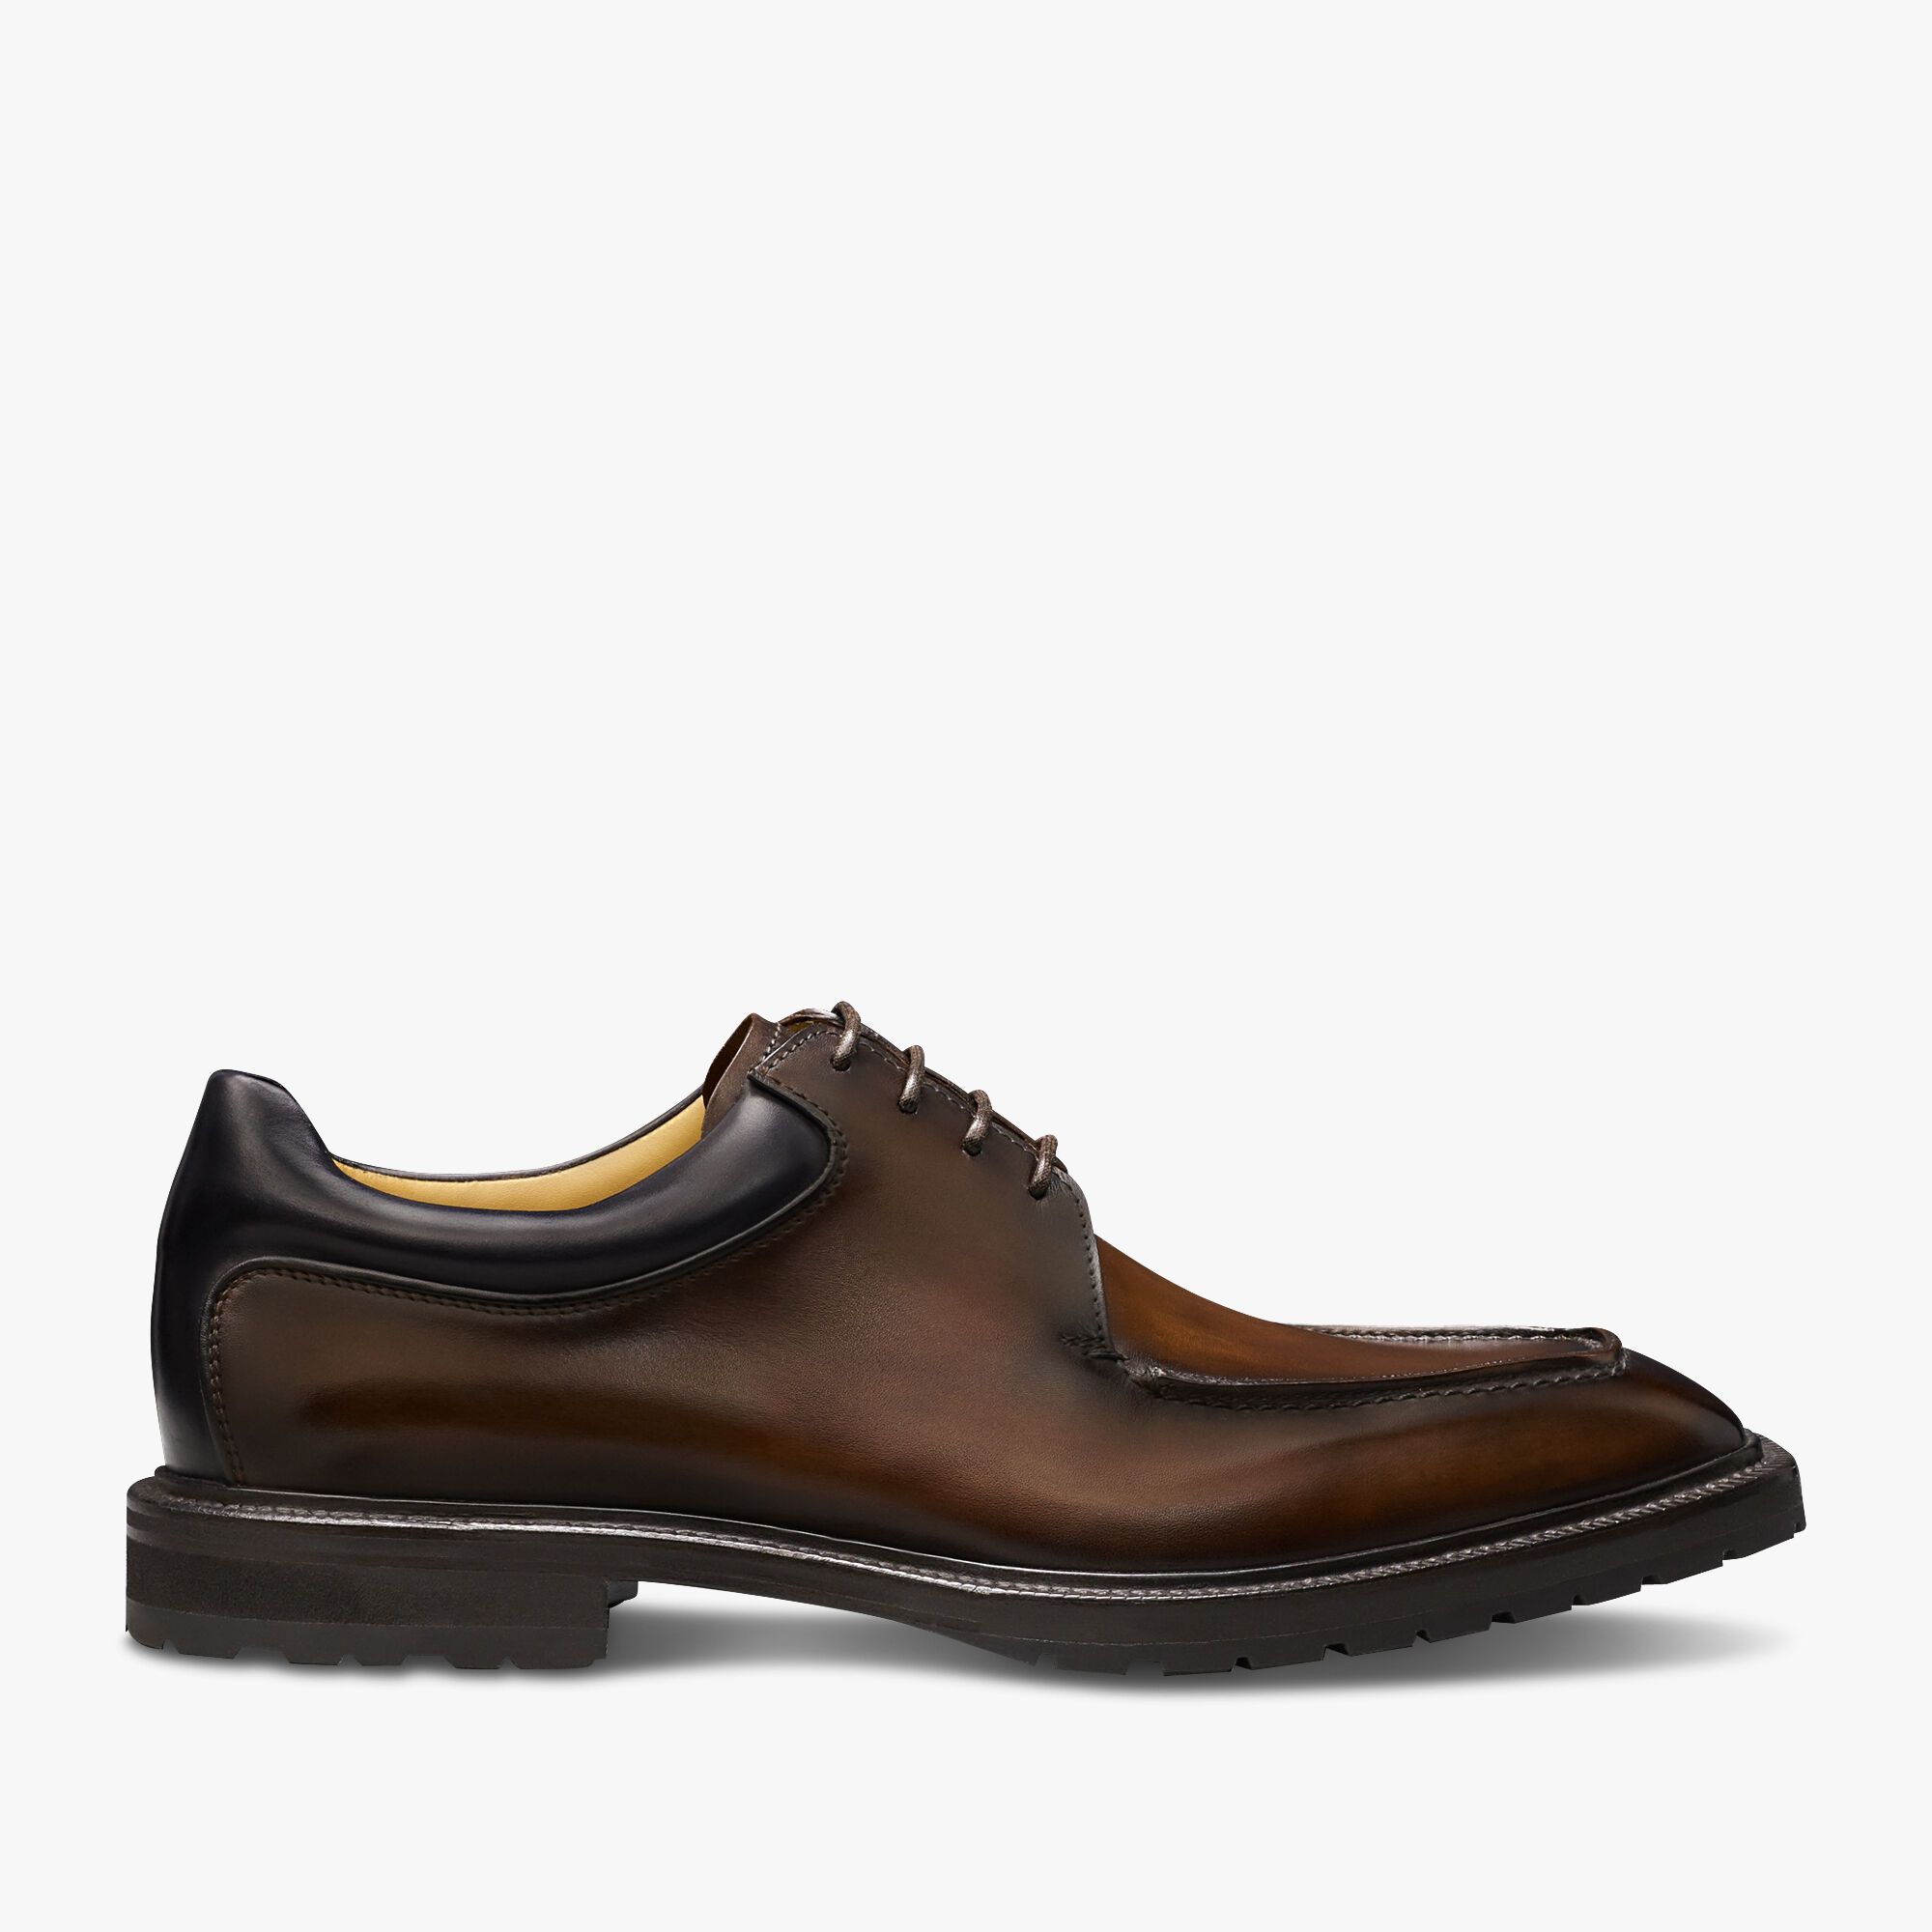 Oxford and Derby collections by Berluti - US